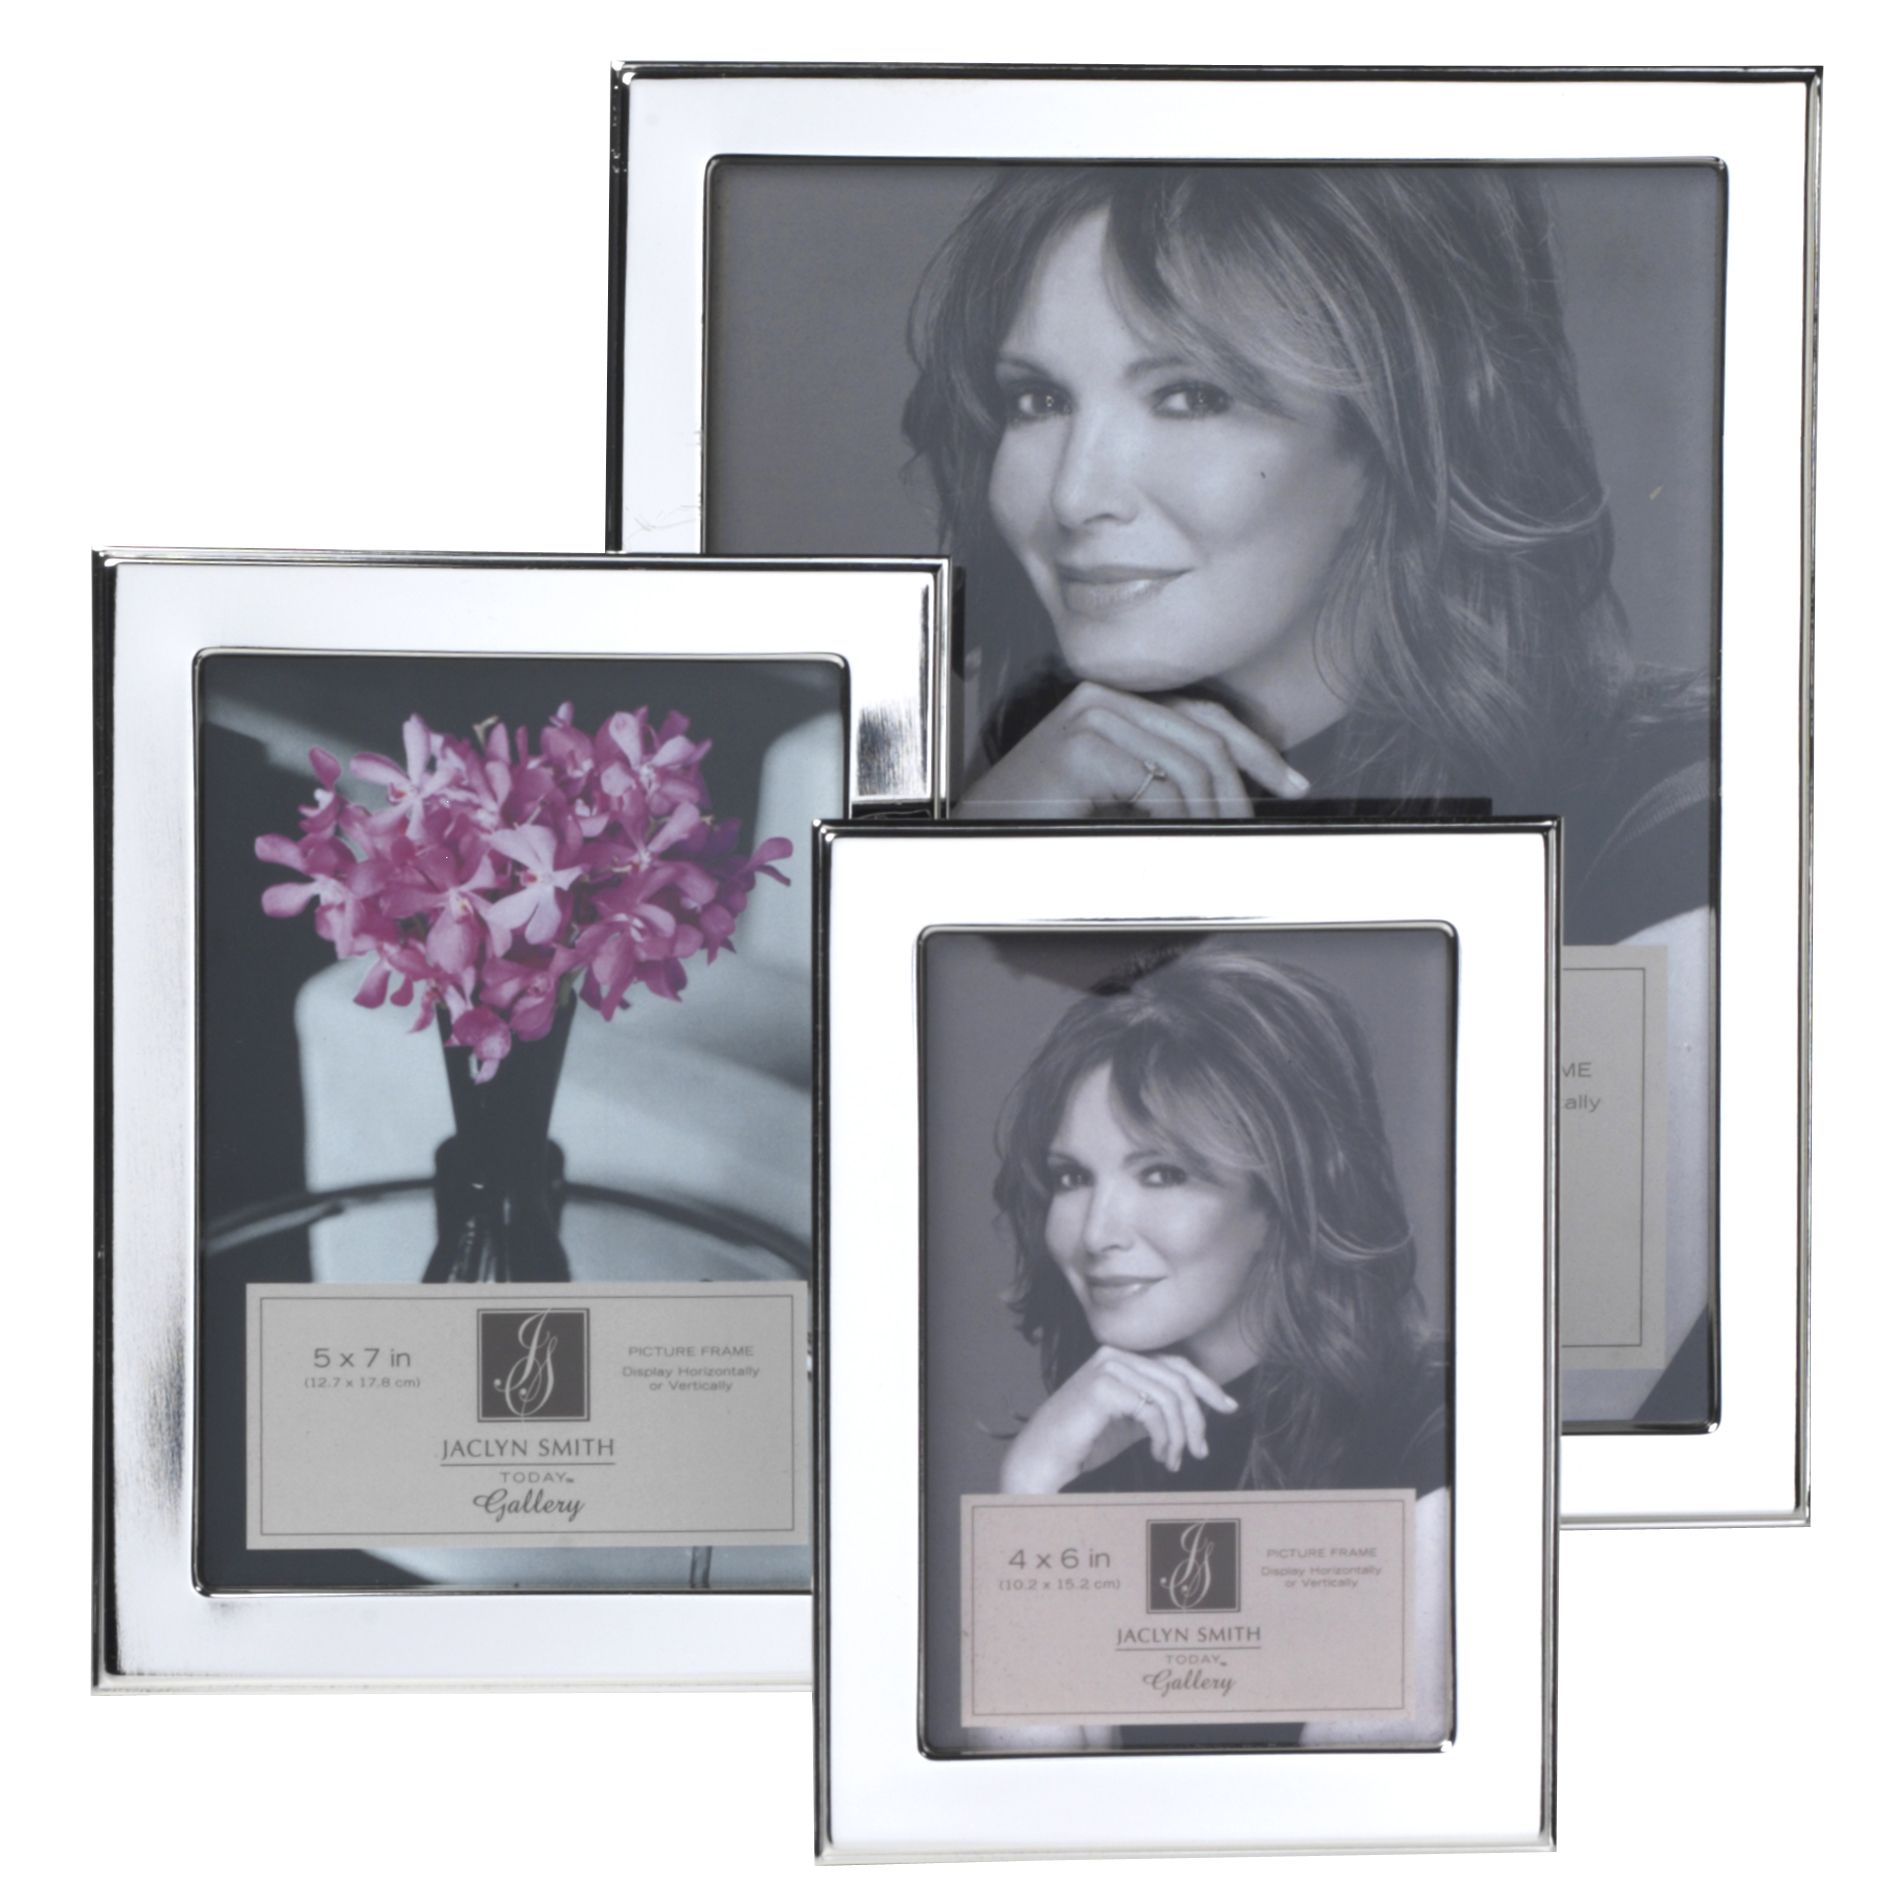 Jaclyn Smith Today Silver Gallery Picture Frame